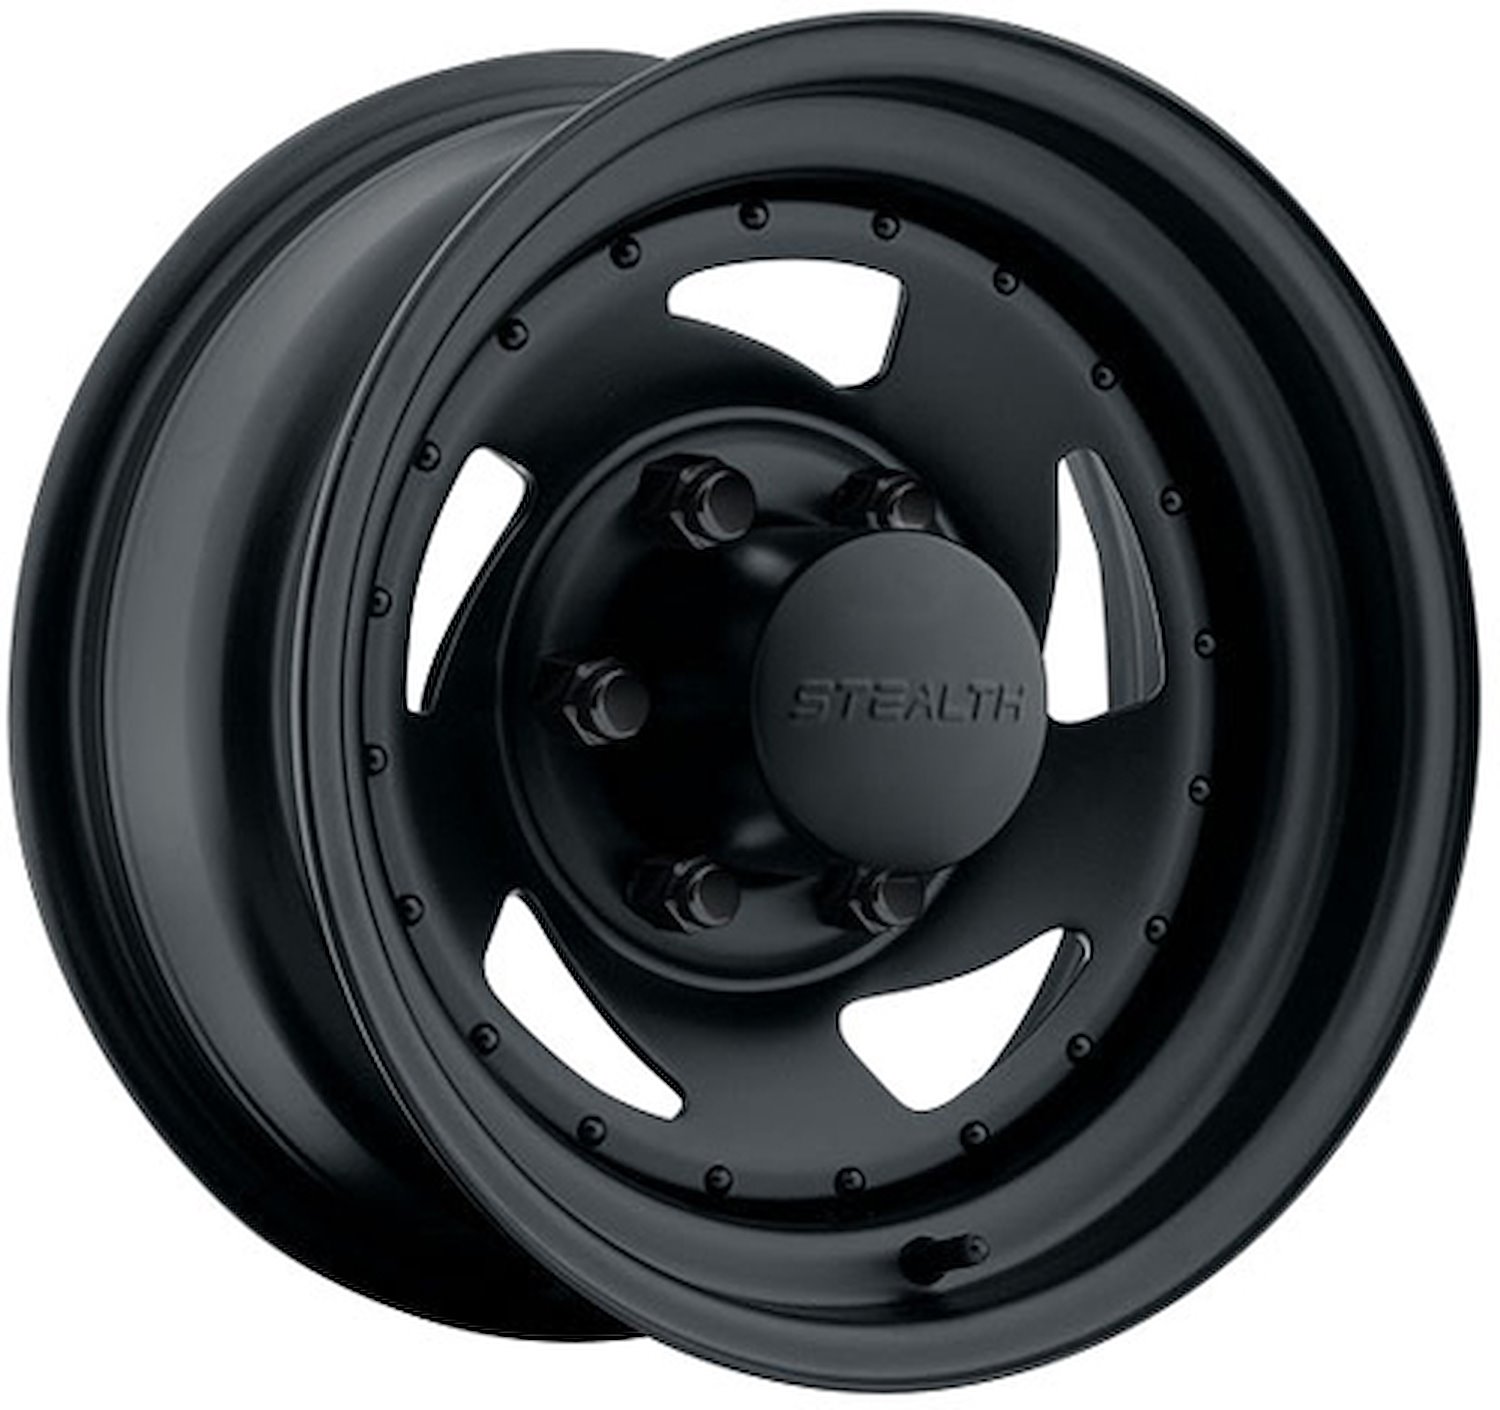 STEALTH BLACK BLADE 15 x 7 5 x 45 Bolt Circle 375 Back Spacing 6 offset 33 Center Bore 1600 lbs Load Rating